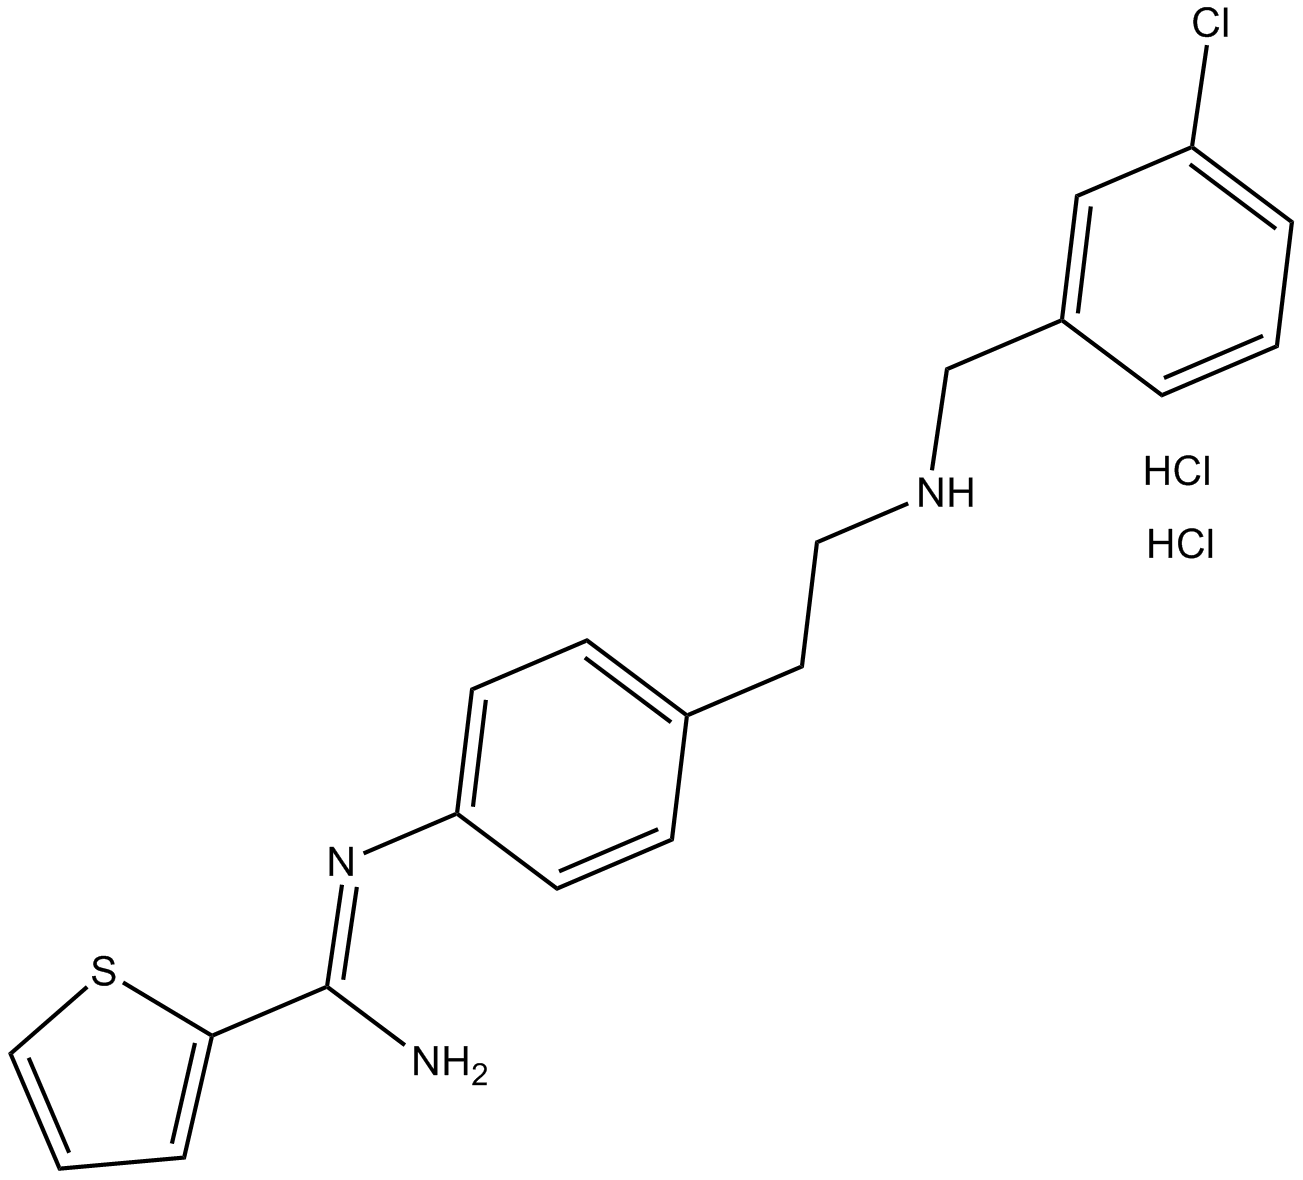 ARL 17477 dihydrochloride  Chemical Structure